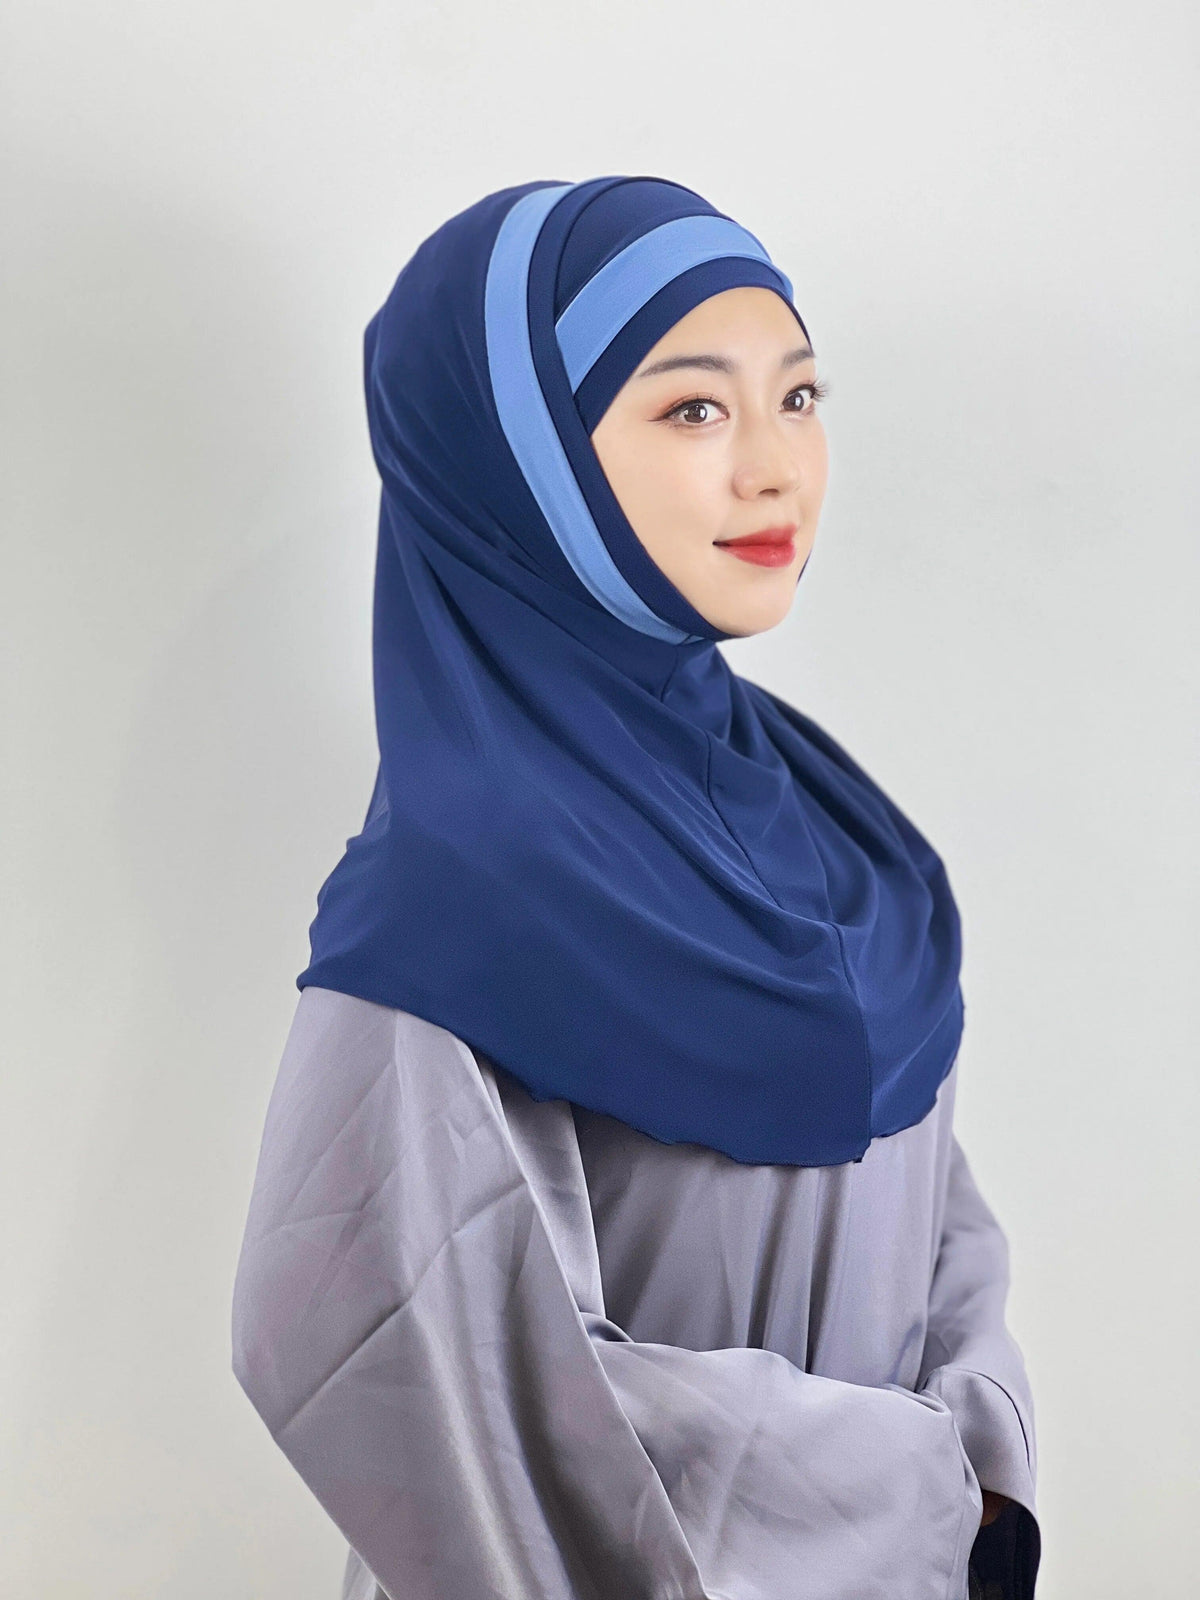 On sale - Amira Modest Hijab - 10 Colours - Free shipping -